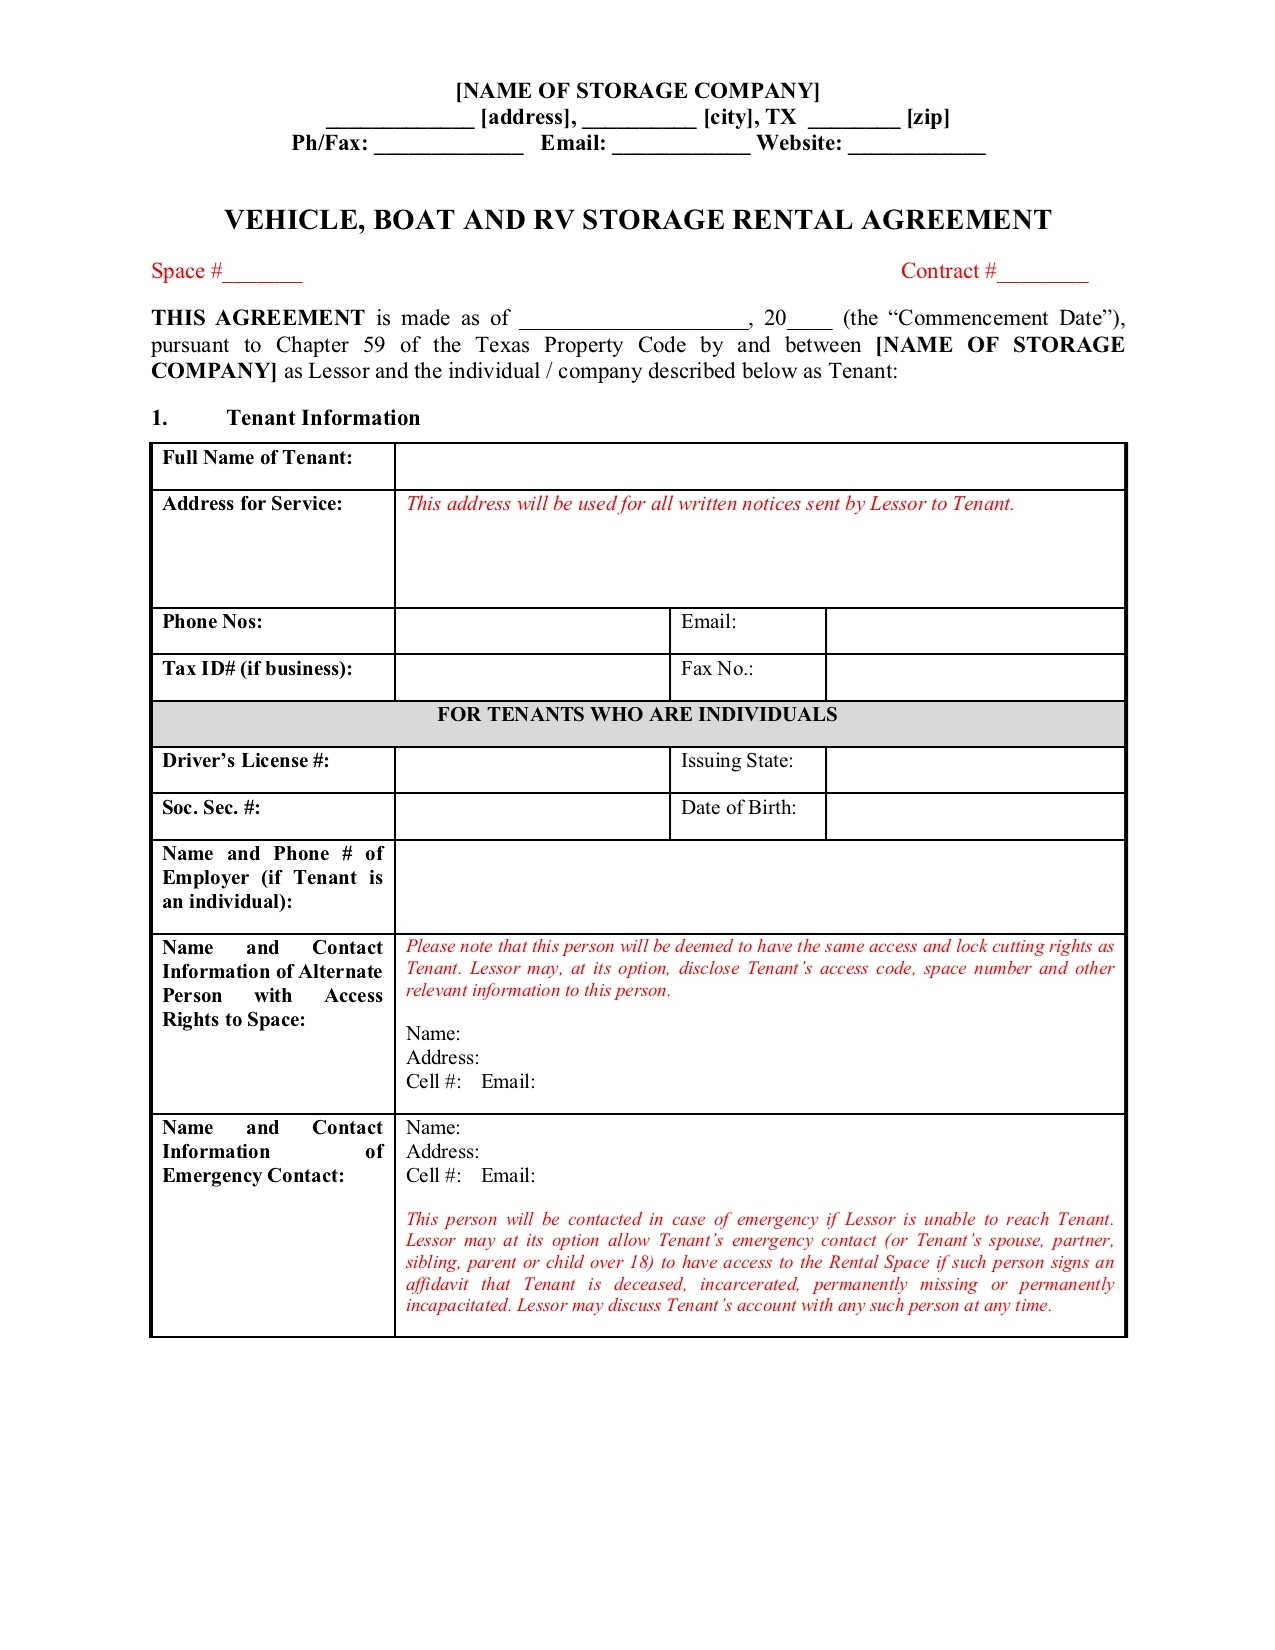 Texas vehicle boat and rv storage rental contract  Legal Forms For rv rental agreement template